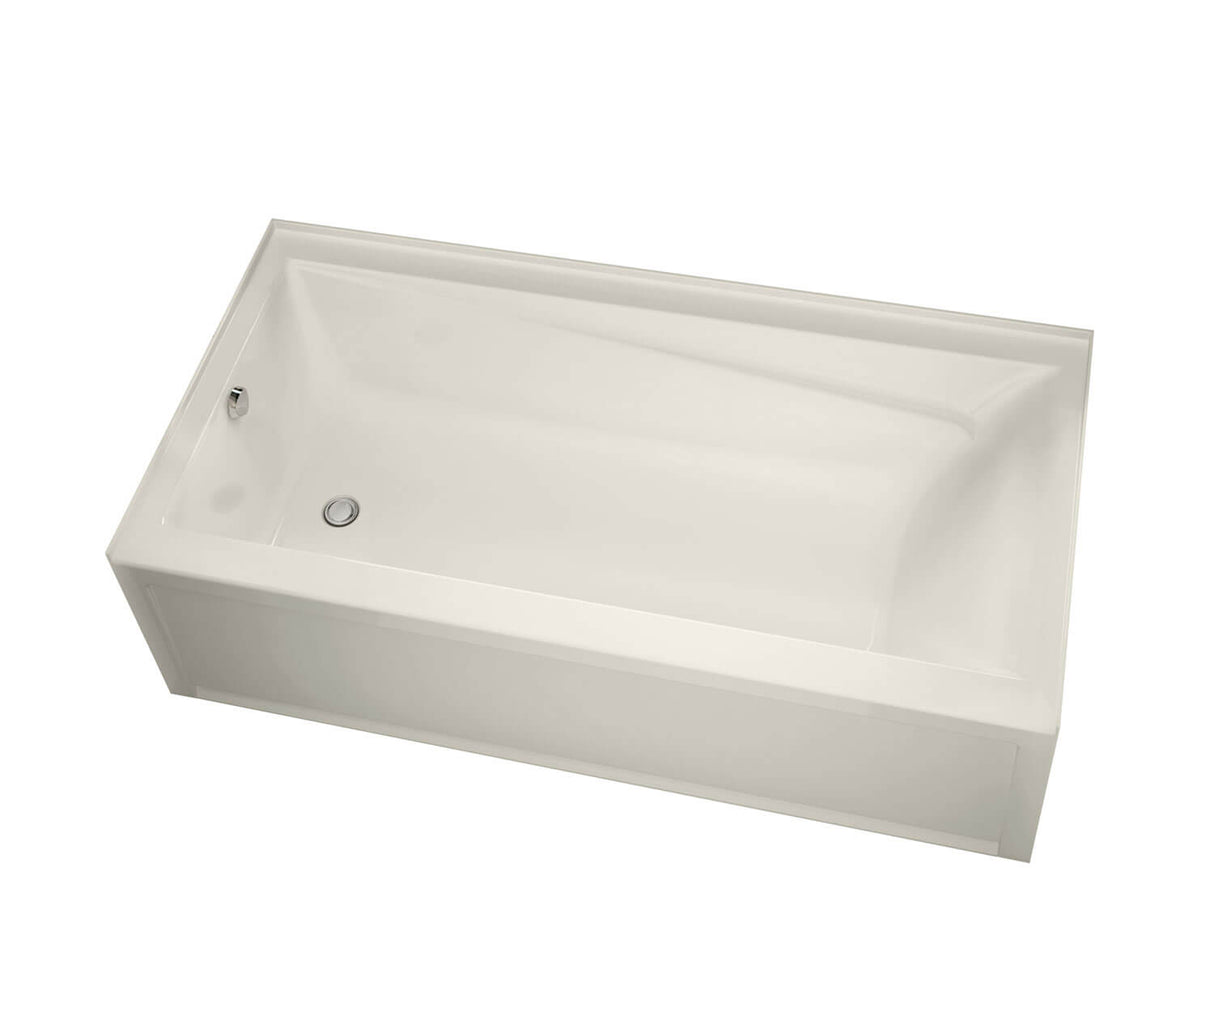 MAAX 106183-003-007-002 Exhibit 7236 IFS Acrylic Alcove Right-Hand Drain Whirlpool Bathtub in Biscuit